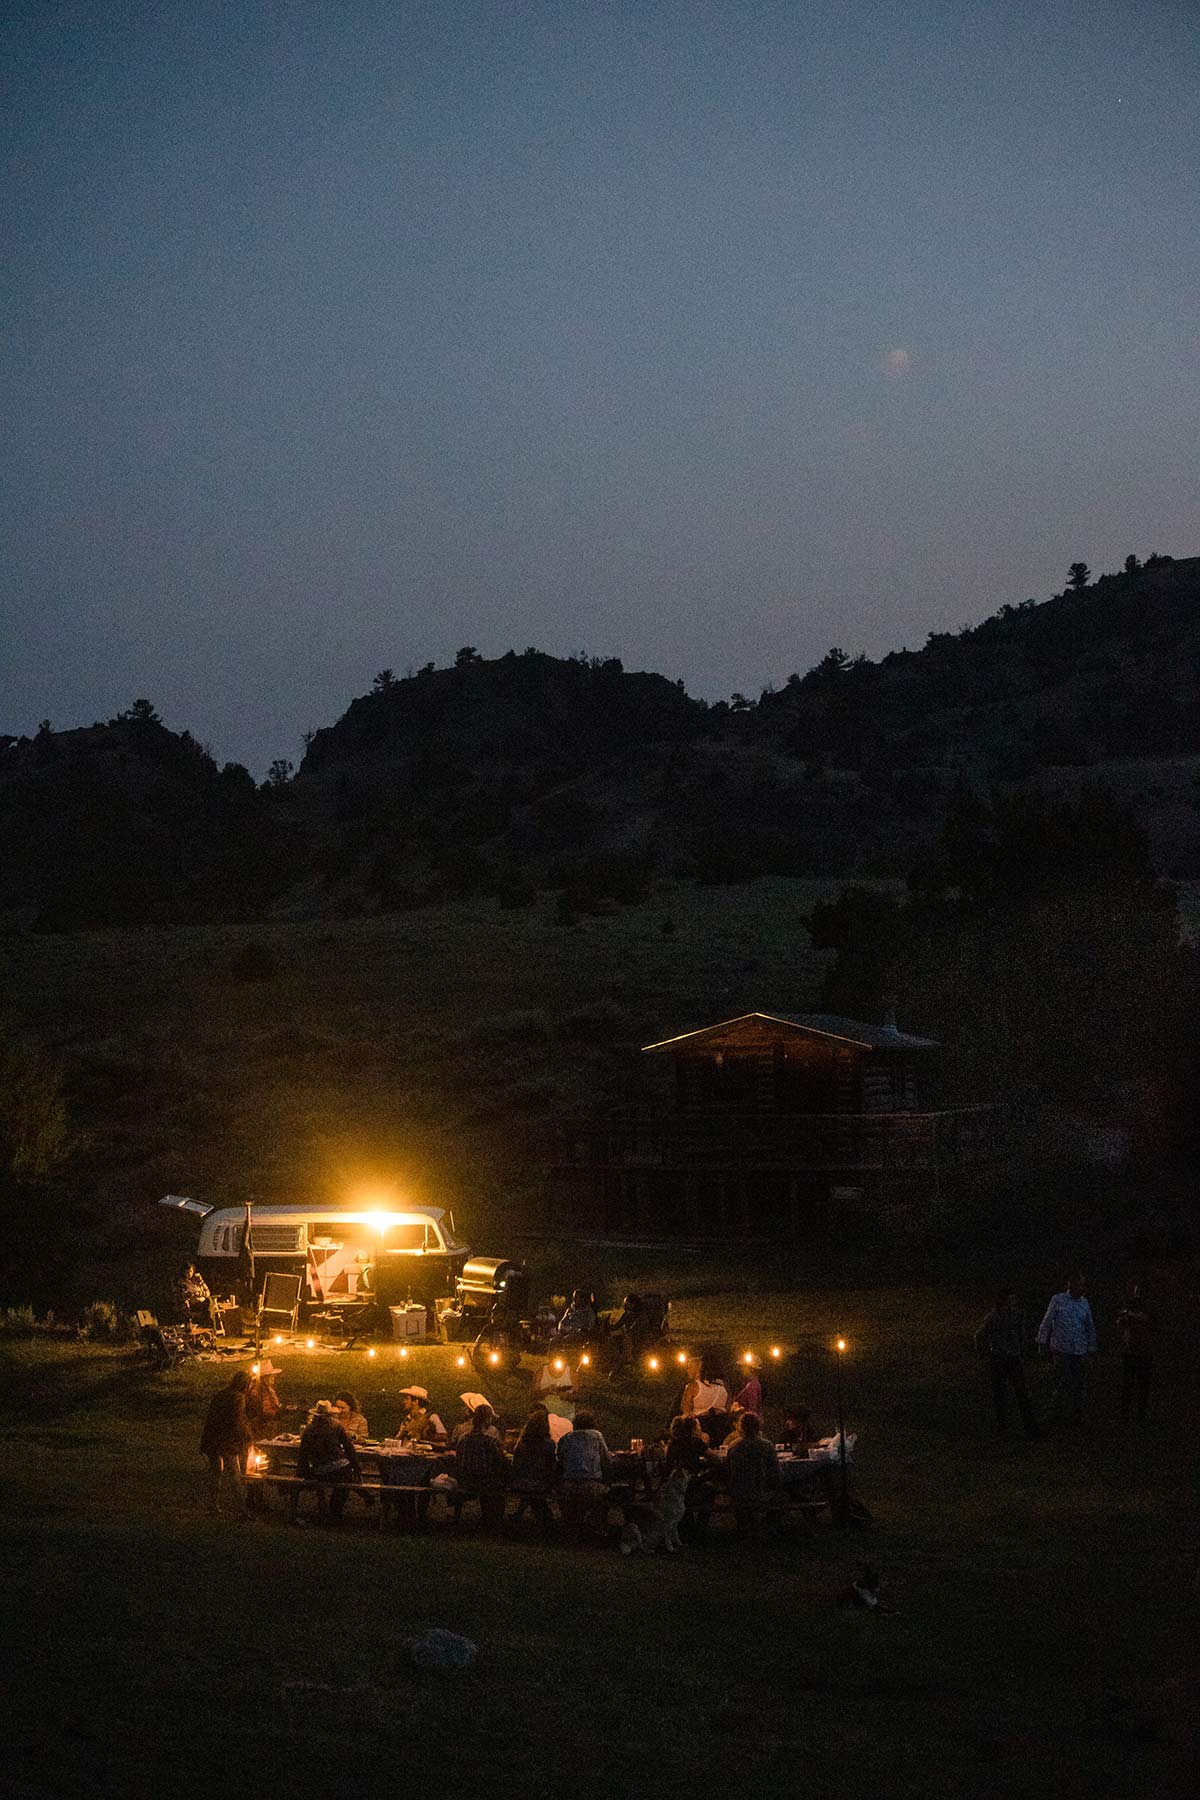 Photograph of late evening. A let vw bus sits in the background. In the foreground people sit together under a lit table.